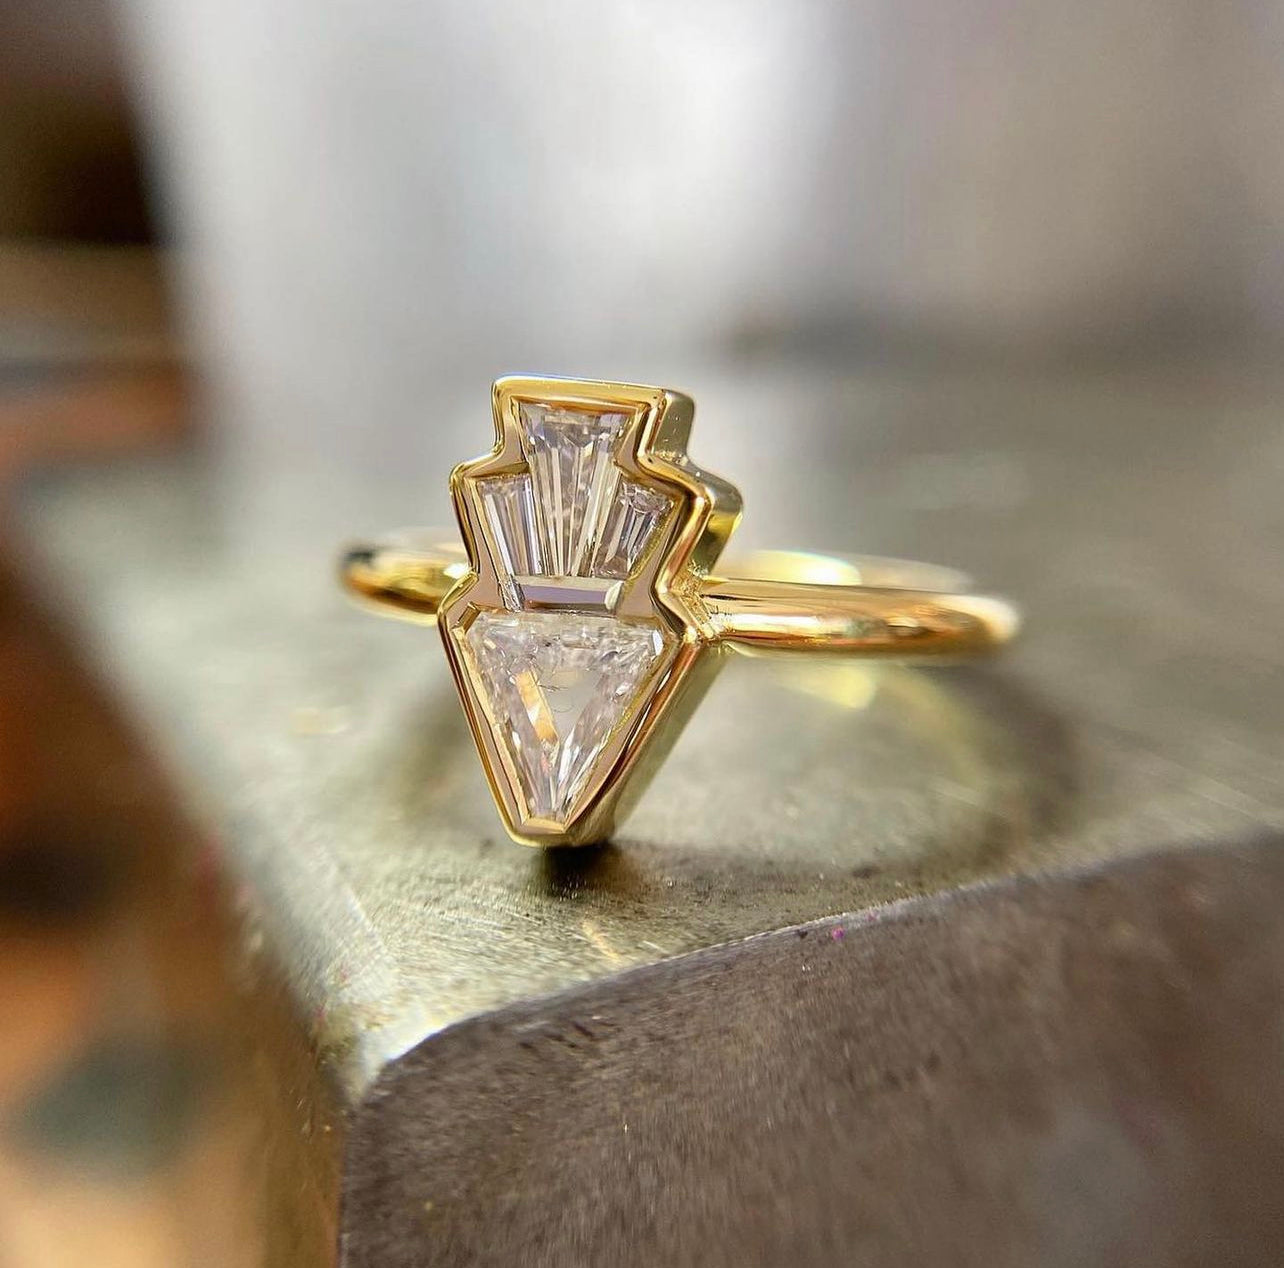 IN STOCK One of a kind 18ct Yellow Gold Art Deco Inspired Diamond Ring